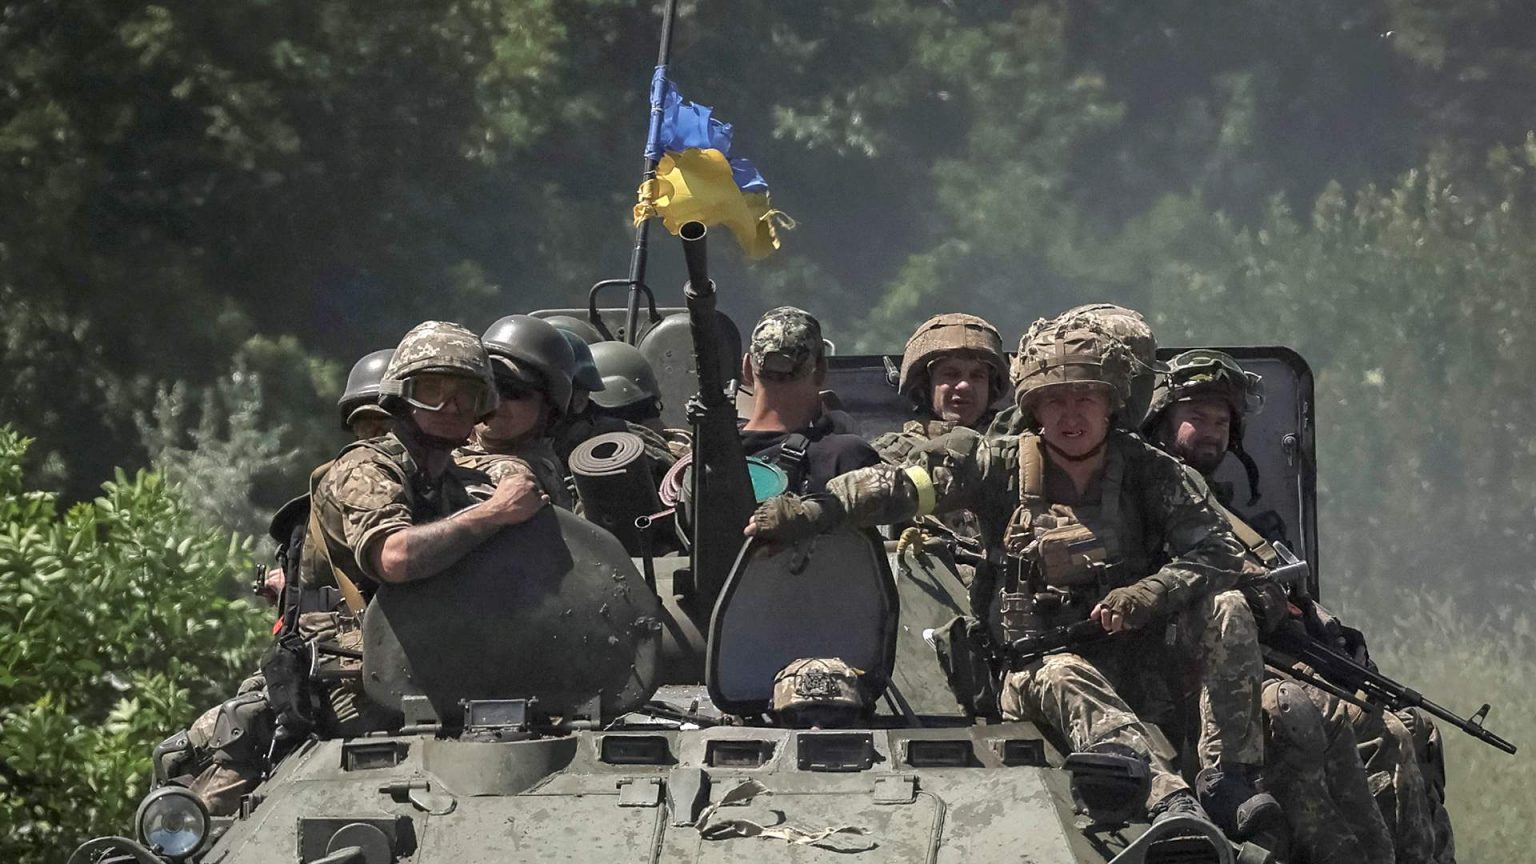 What To Expect From Ukrainian "Counter-offensive": Can AFU Build On Its Success On Frontline Again?